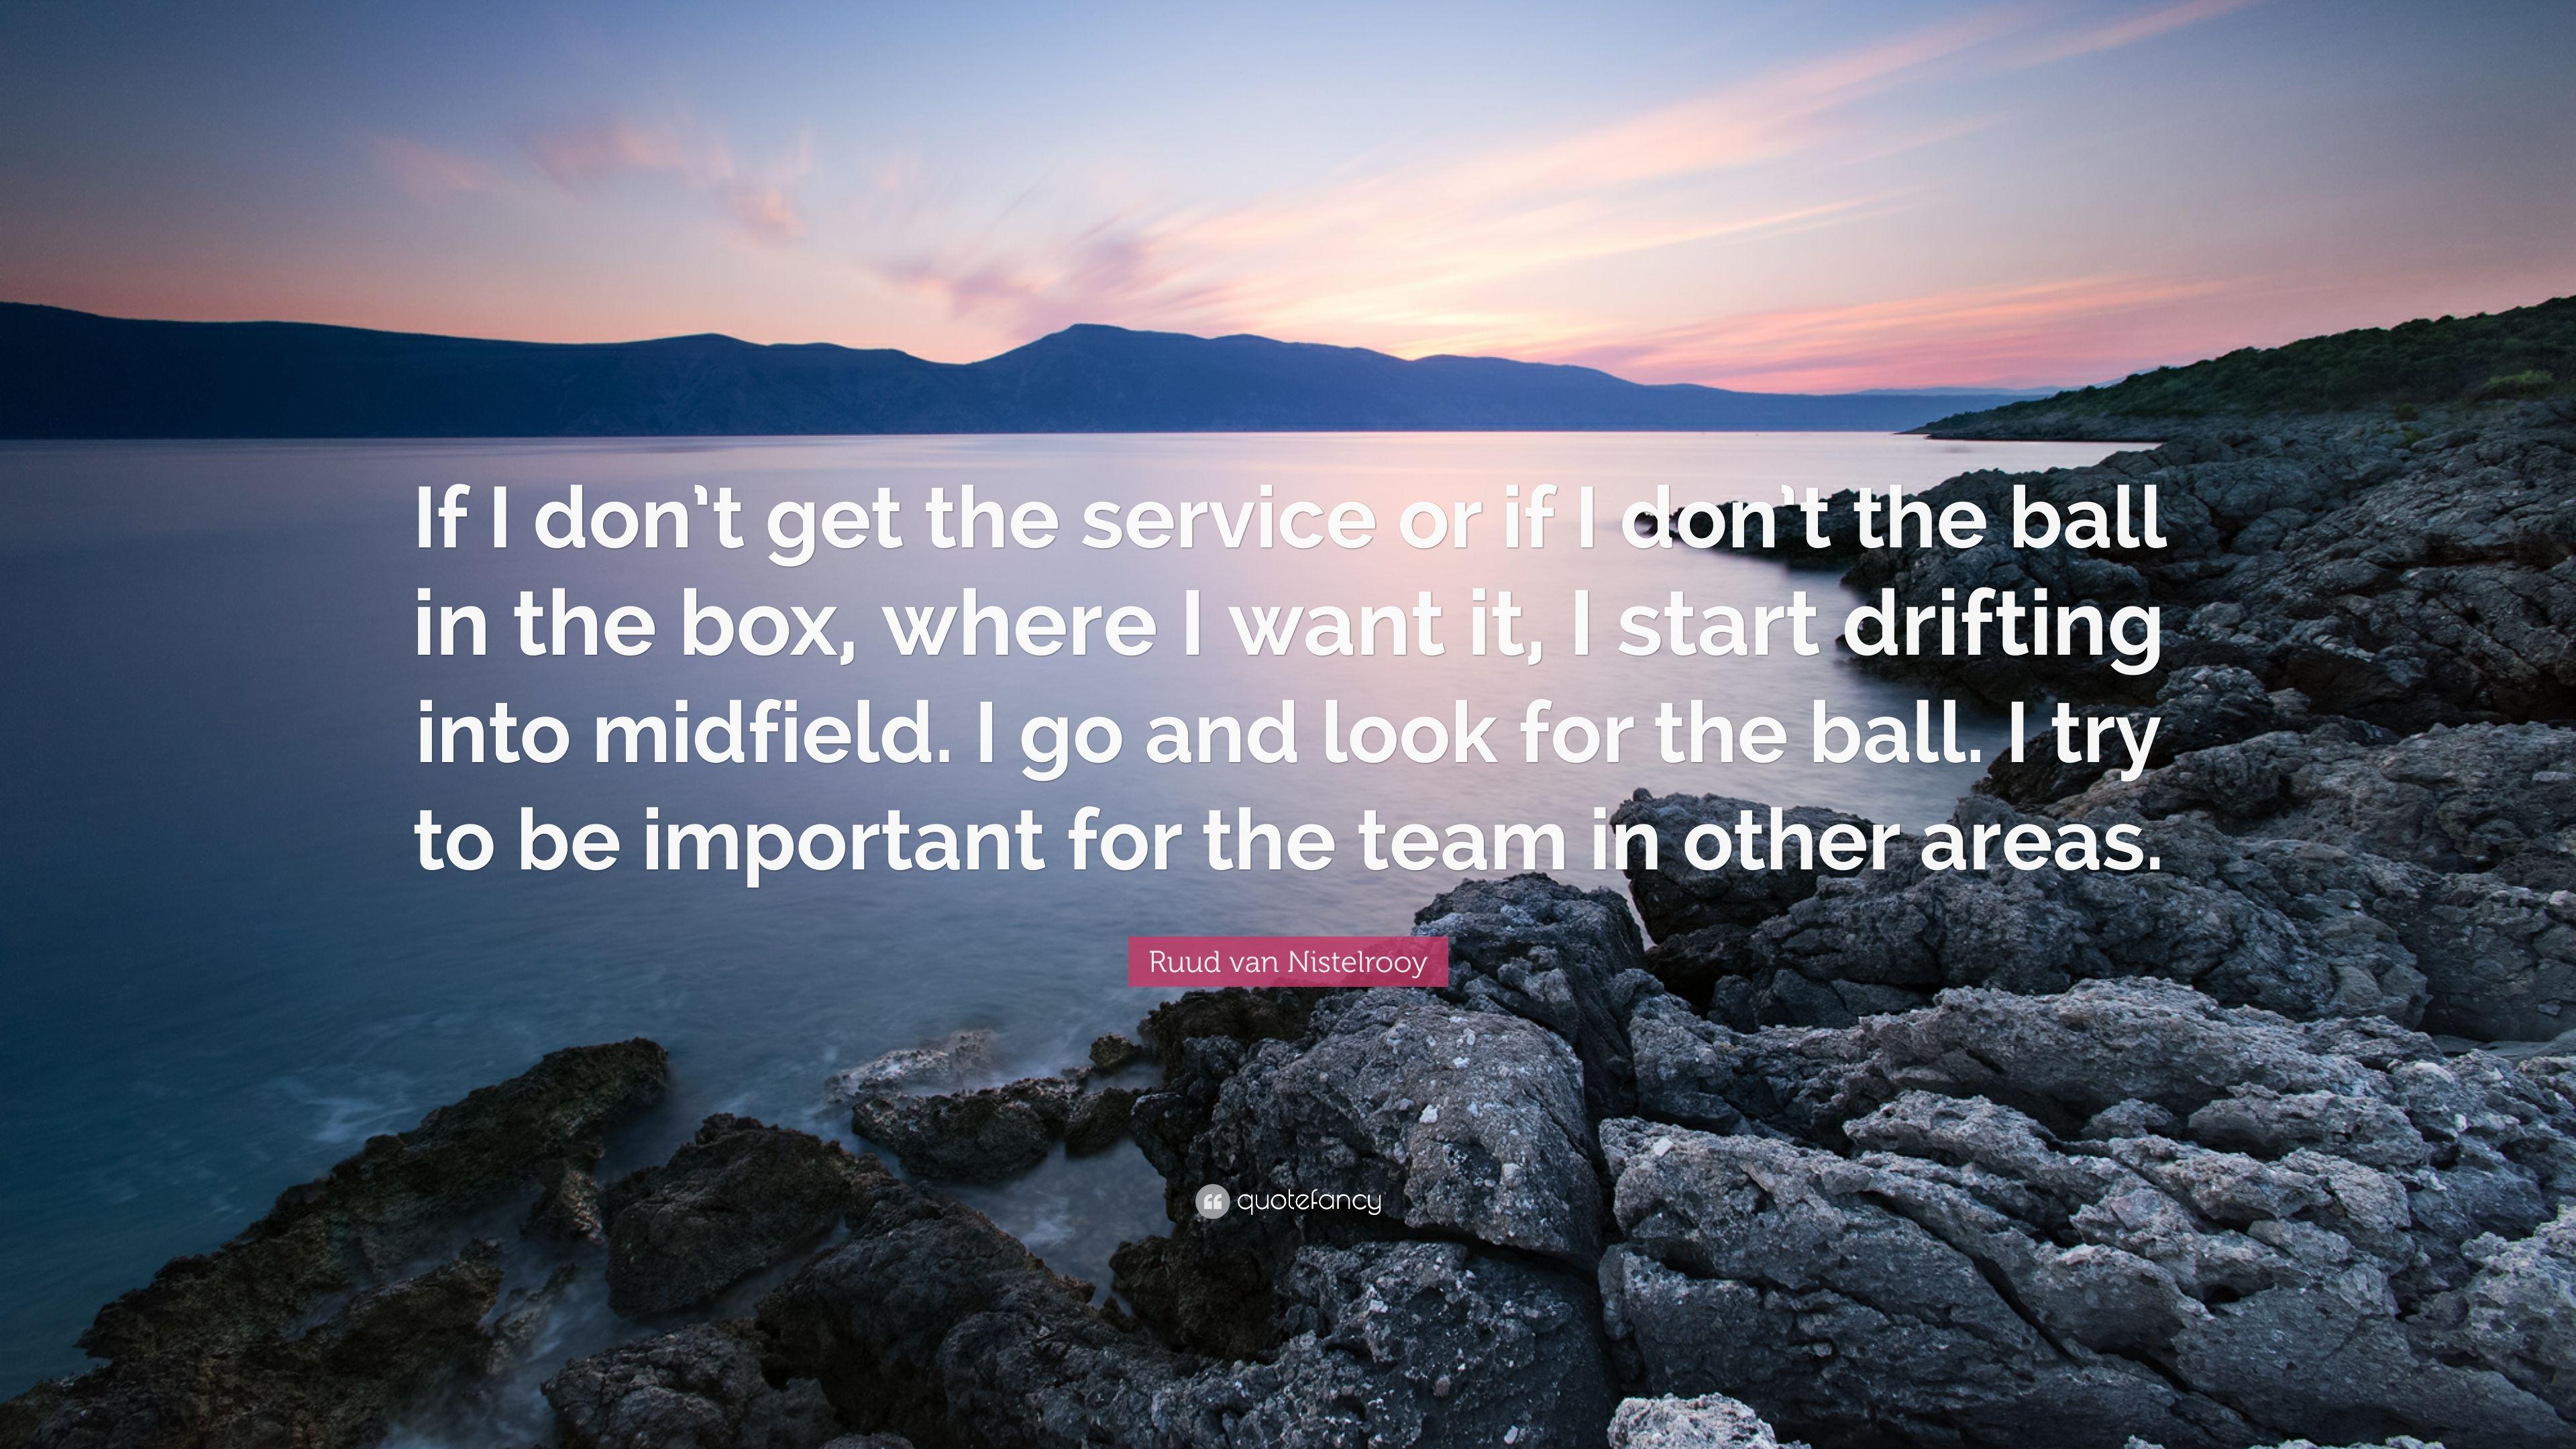 Ruud van Nistelrooy Quote: “If I don't get the service or if I don't